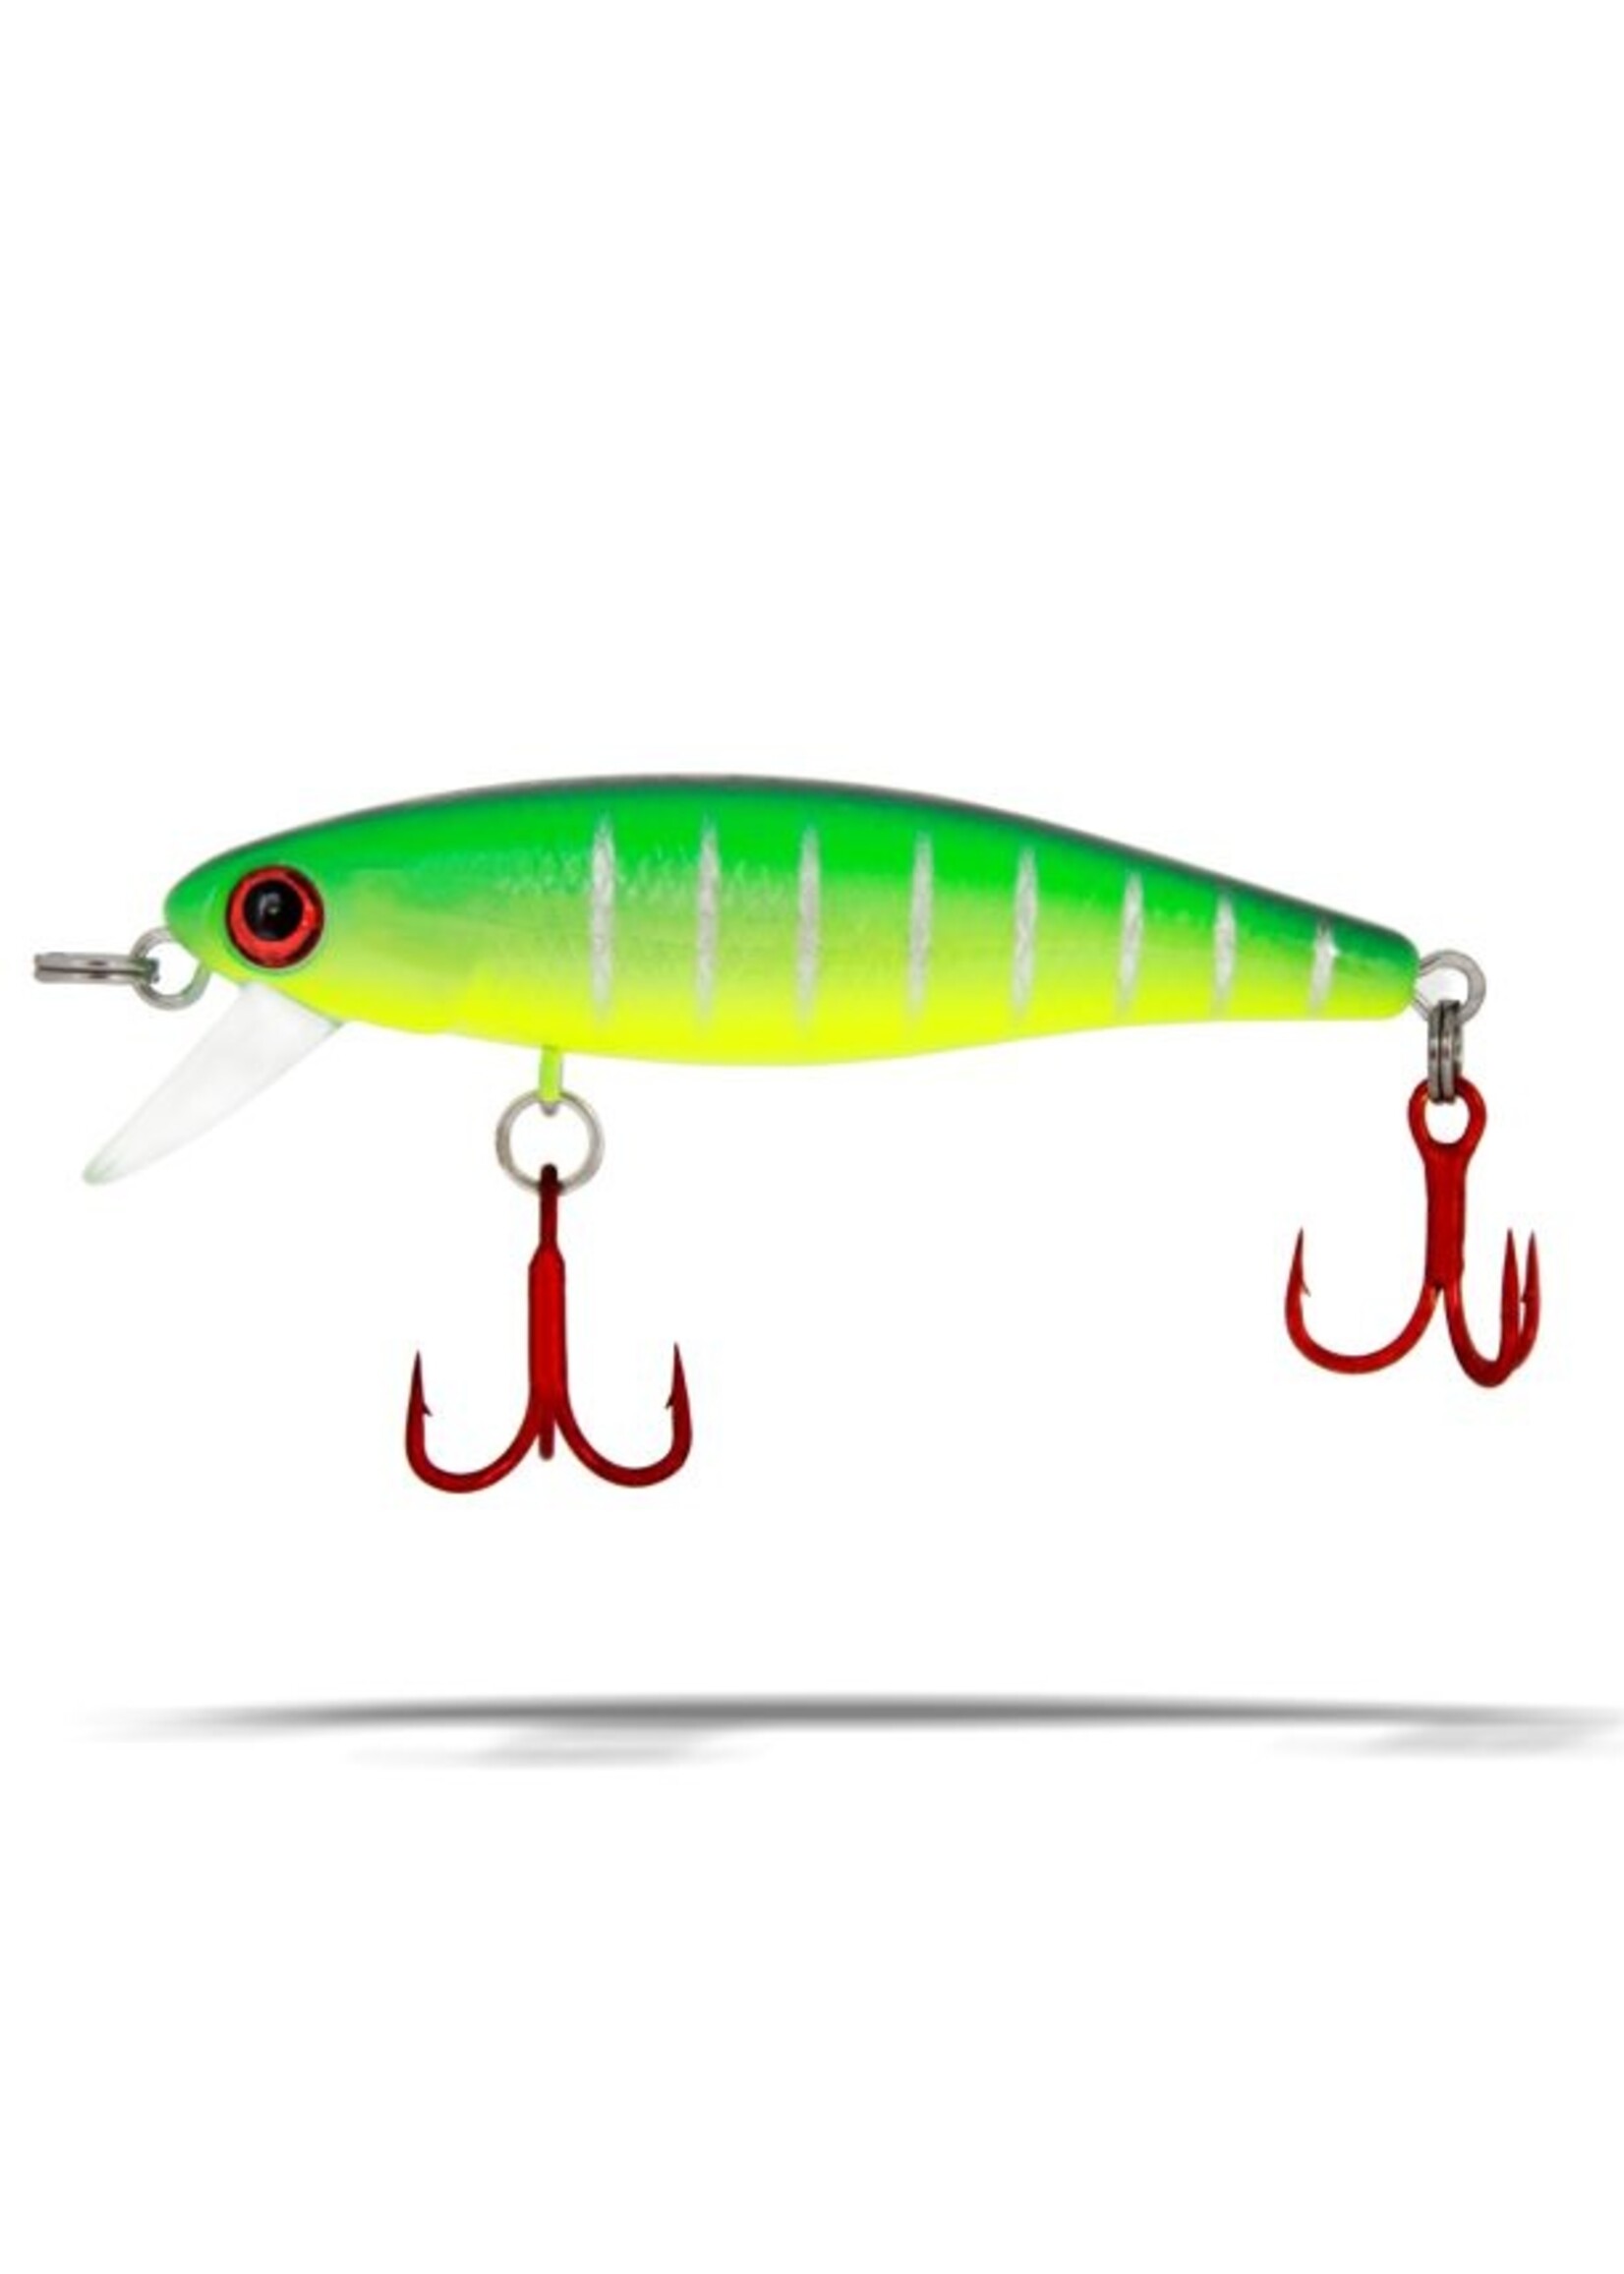 Dynamic Lures HD Trout (Halo Red) NEW Fishing Lure